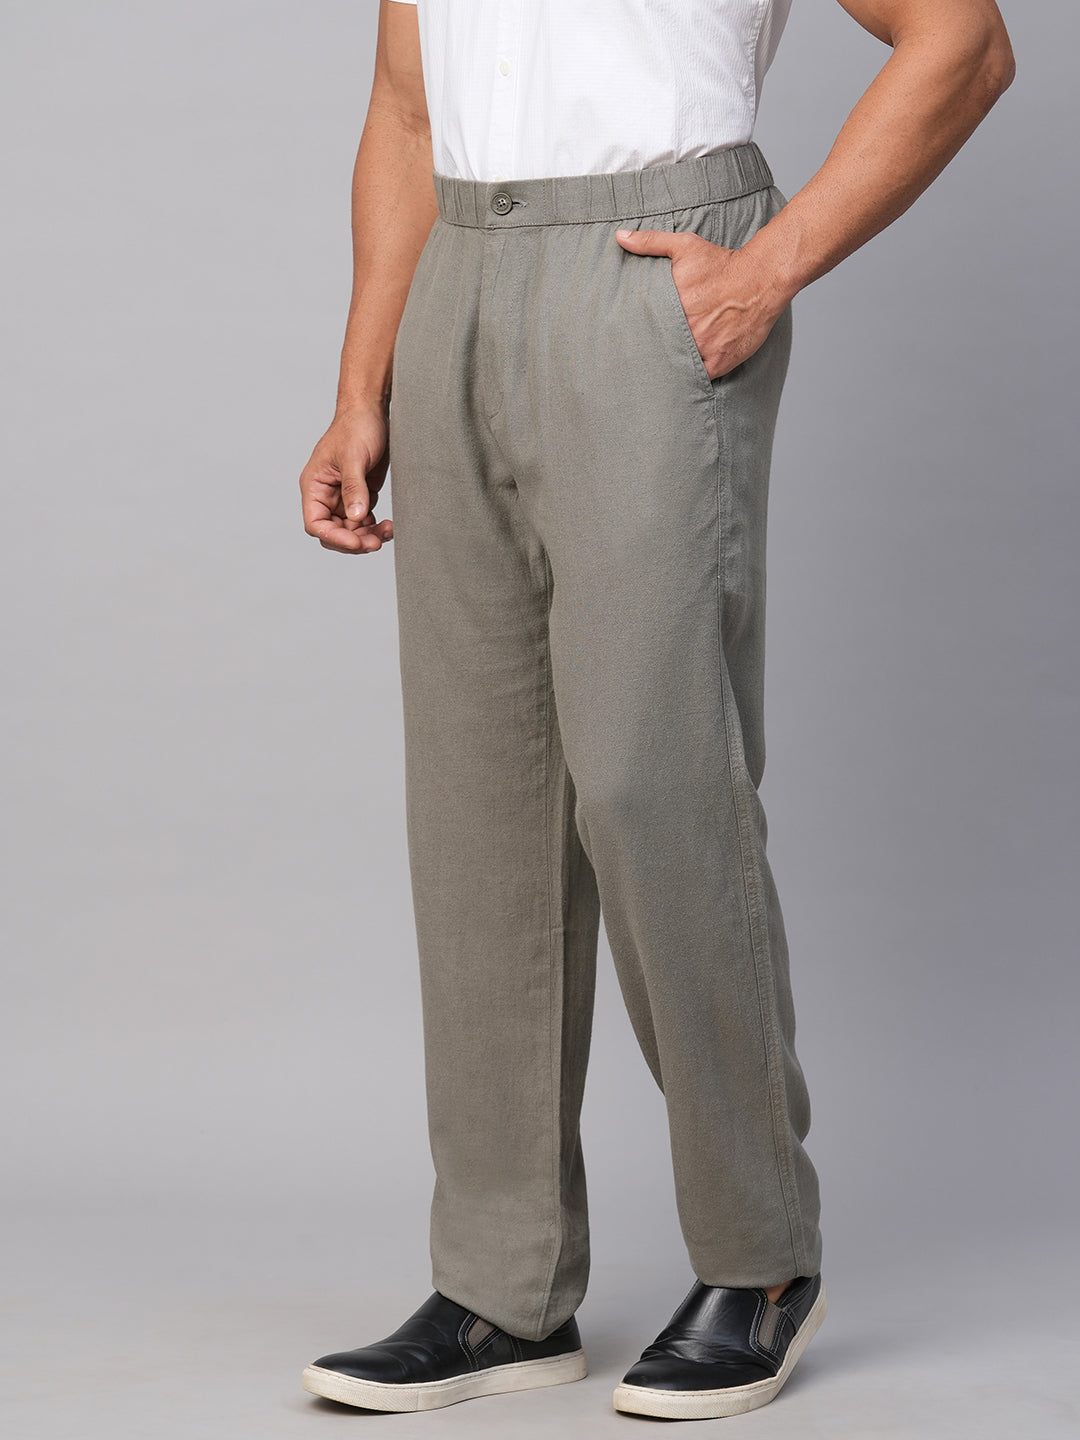 Men Slim Fit Beige Pure Linen Trousers Price in India, Full Specifications  & Offers | DTashion.com